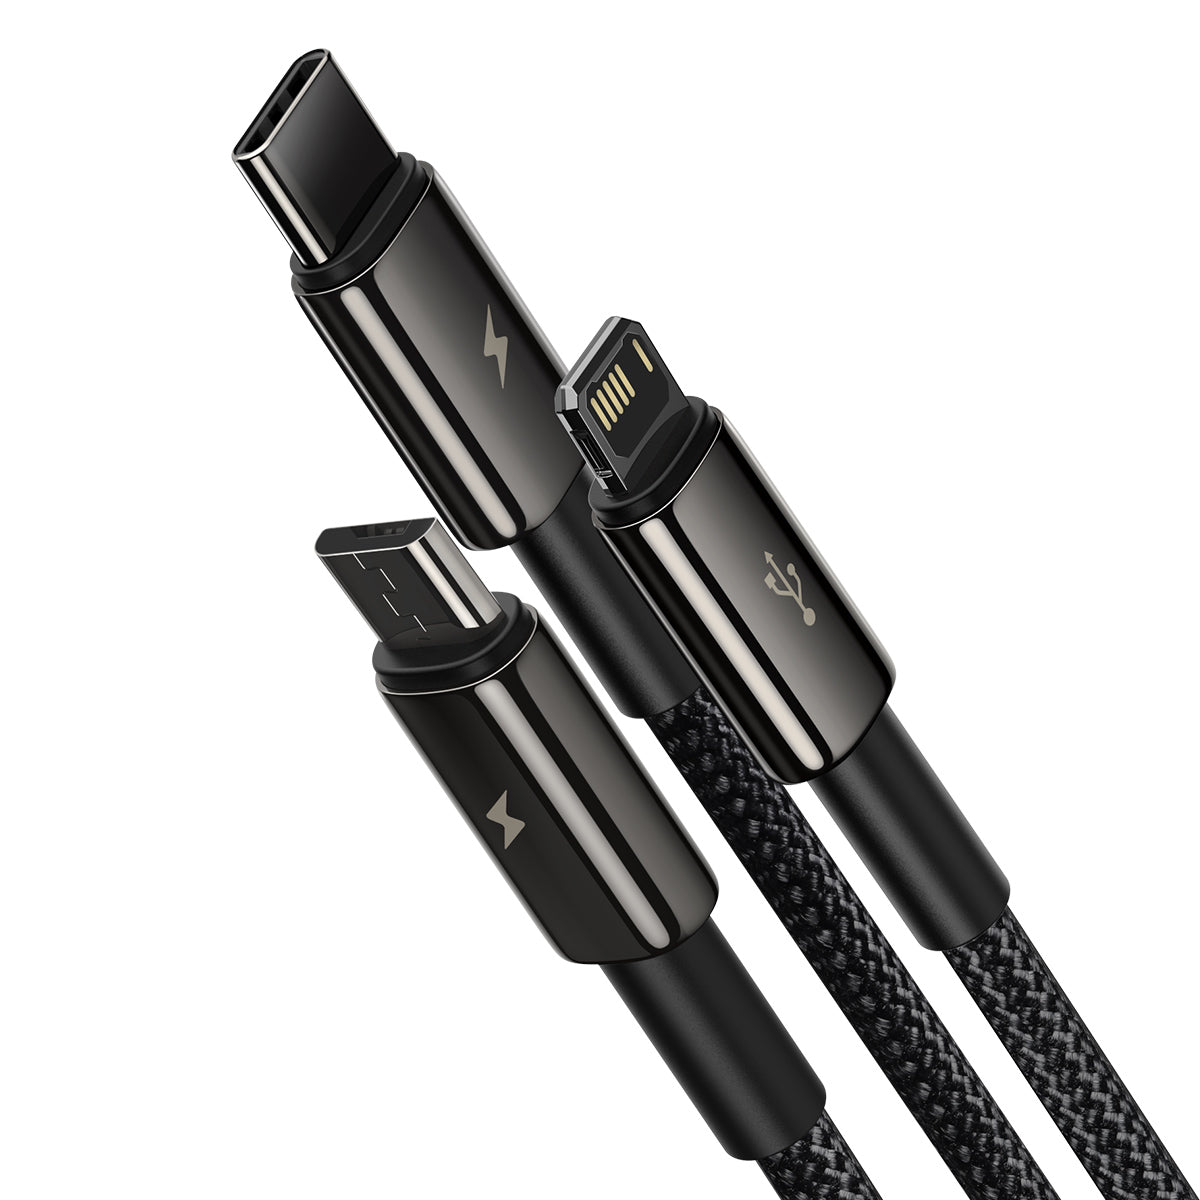 Baseus Tungsten Gold 3 in 1 Charging Data Cable Price in Pakistan